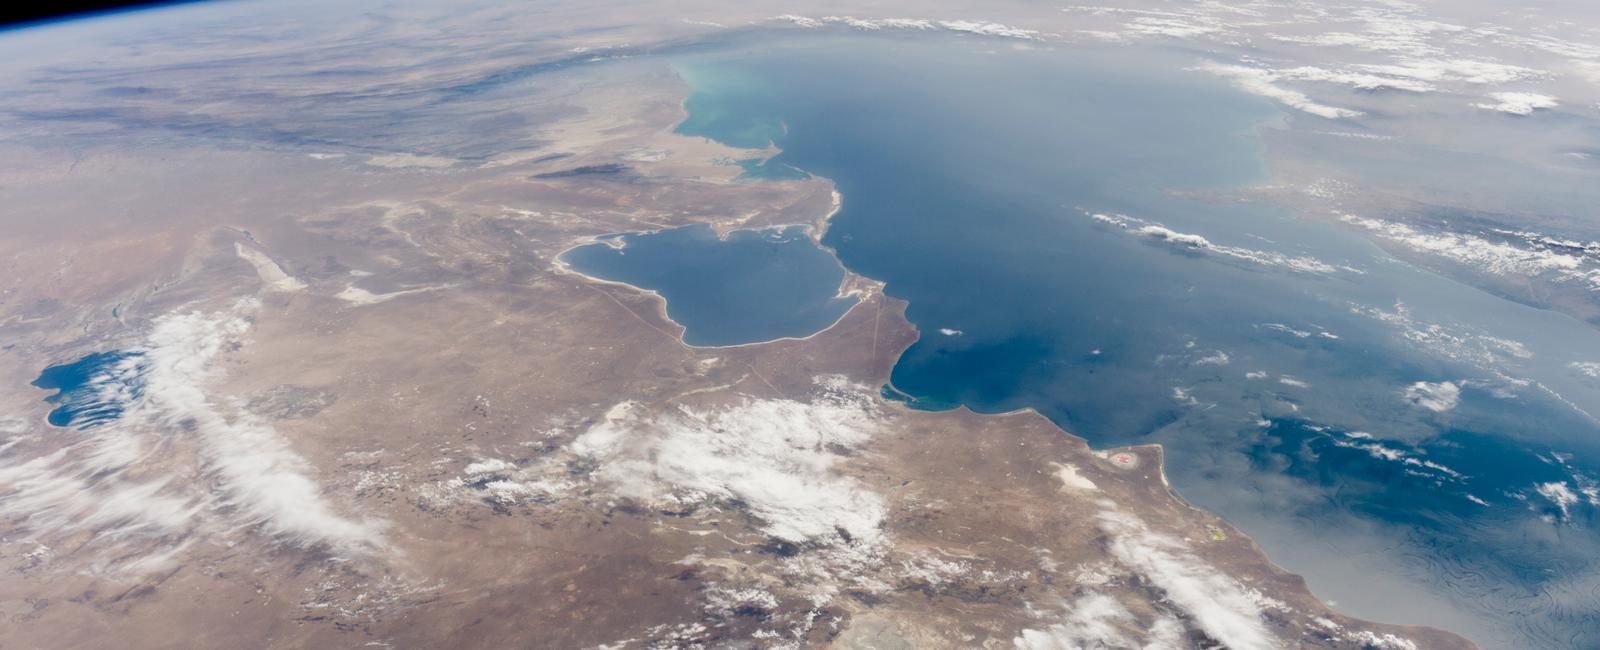 Until 11 million years ago the caspian sea was elevated above land but this changed due to plate tectonics and other advanced geological phenomena